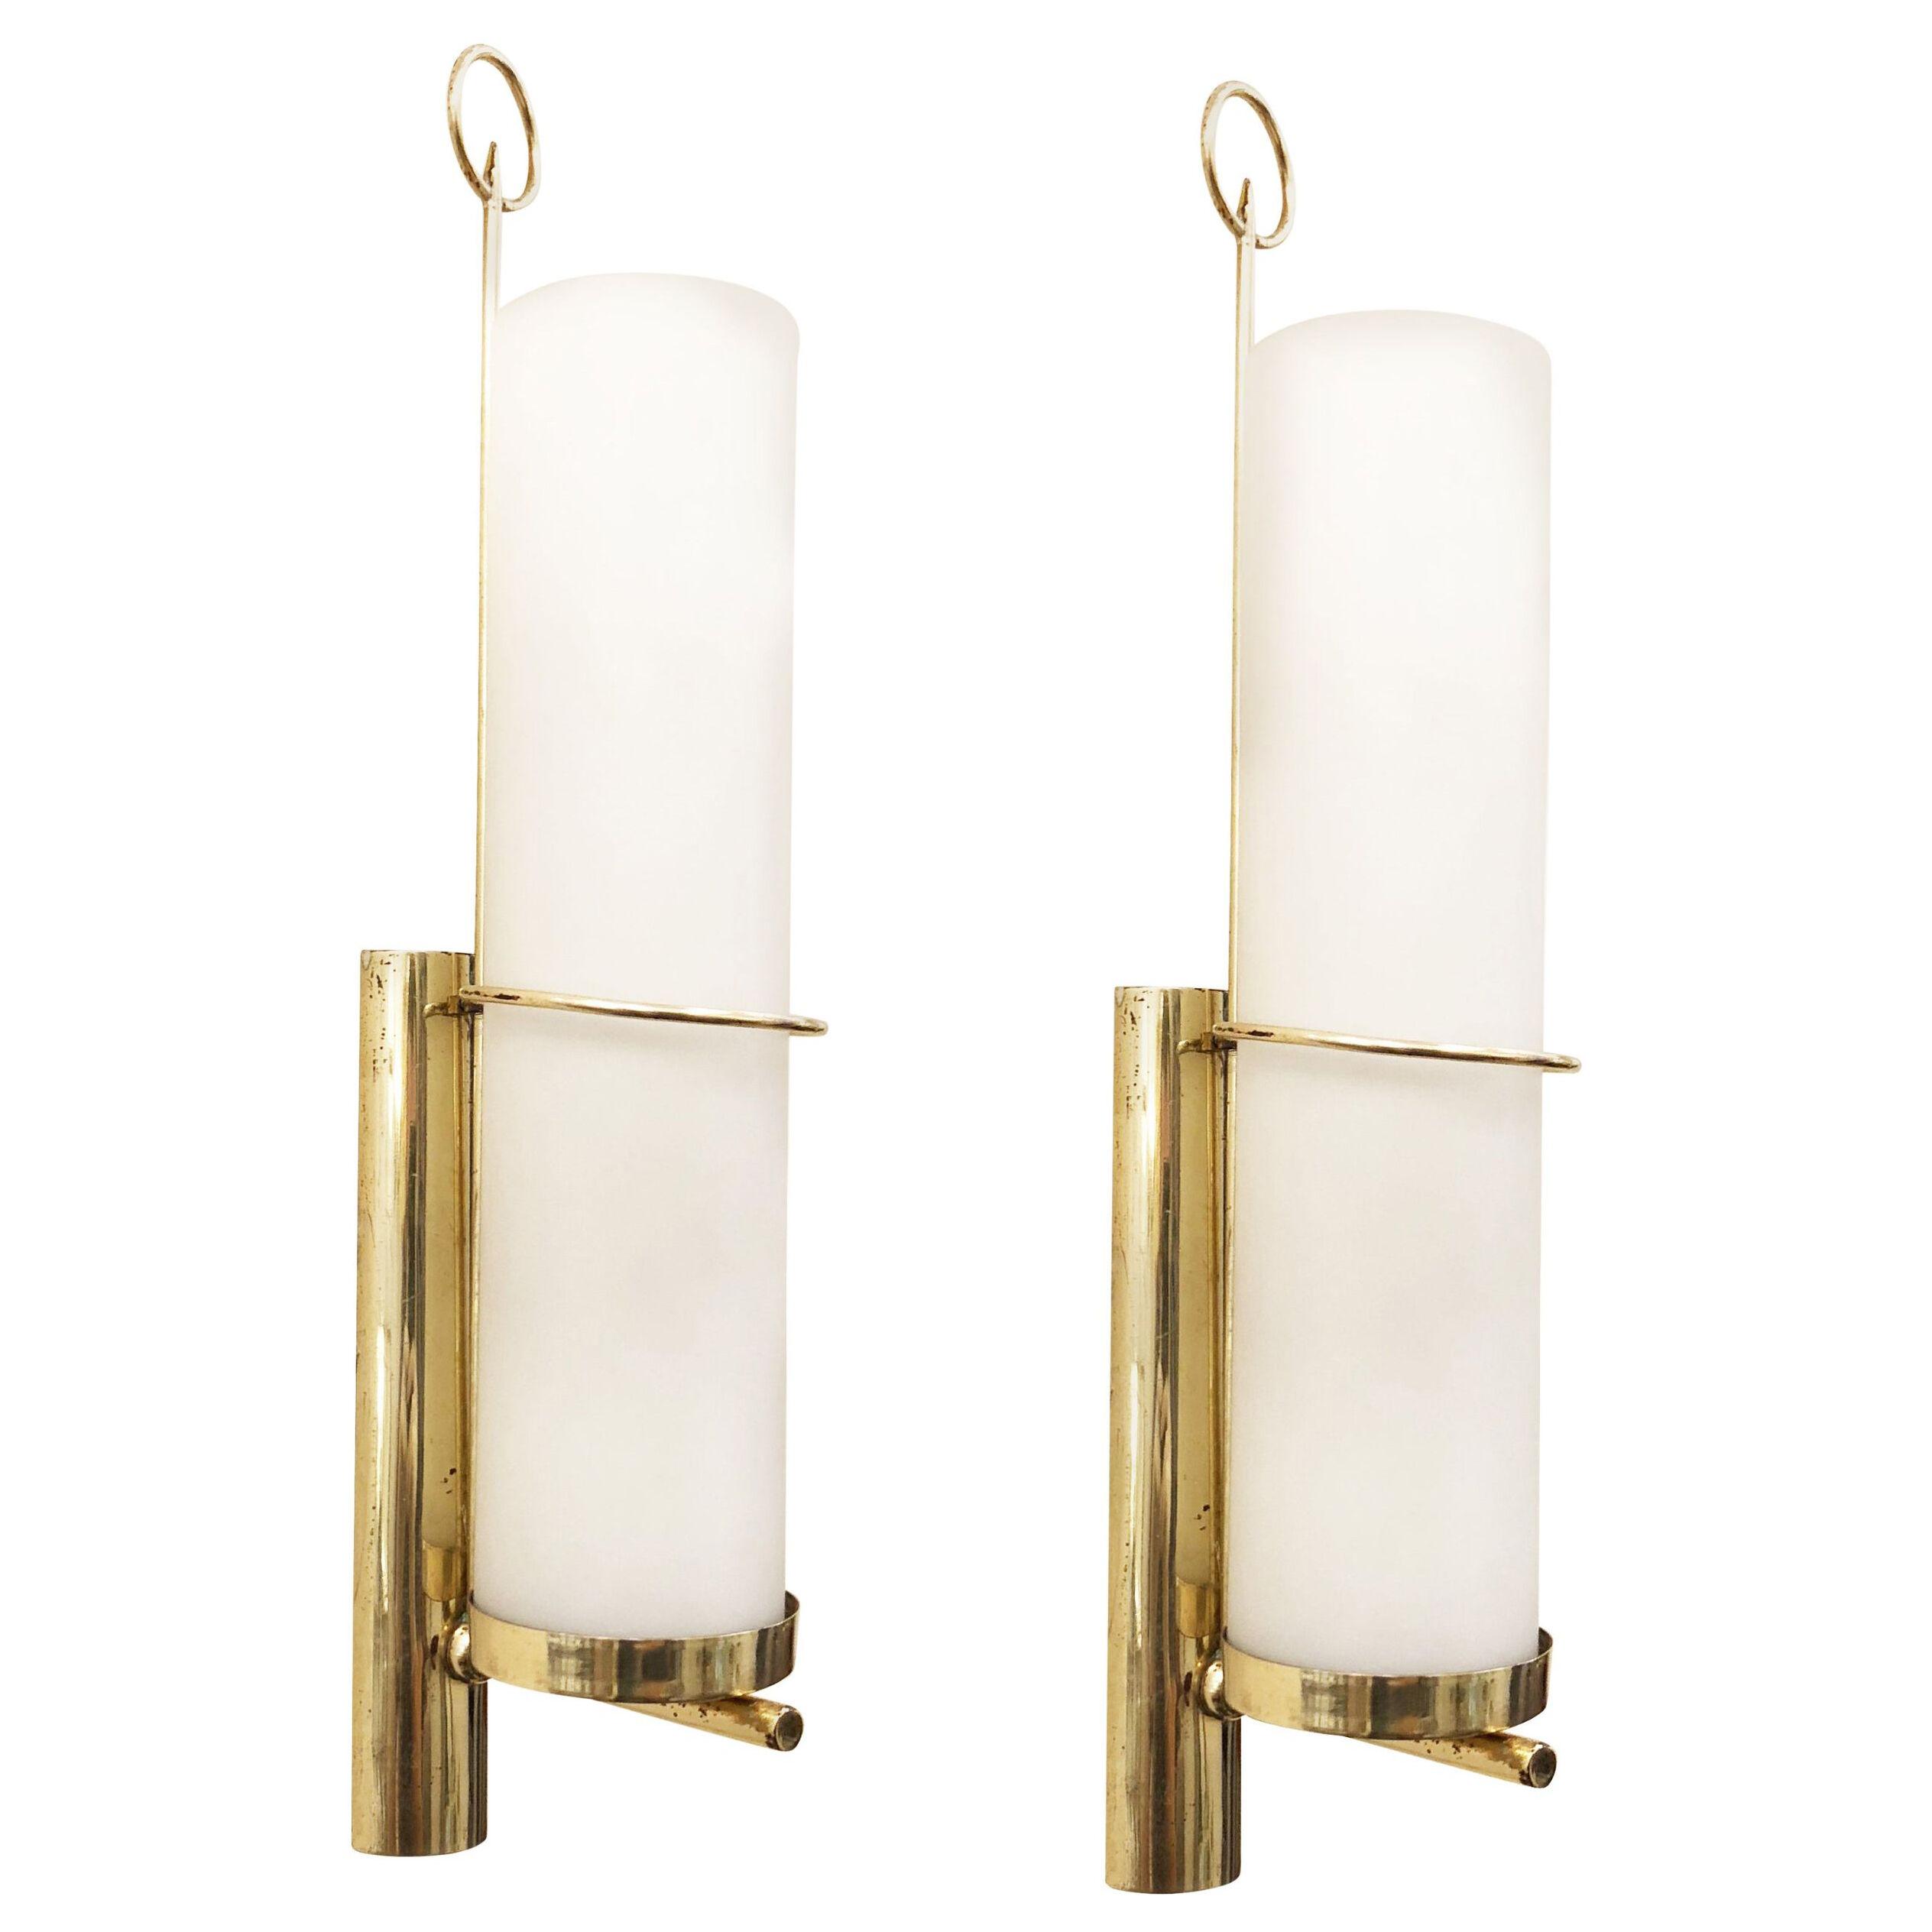 Pair of Cylindrical Midcentury Wall Lights